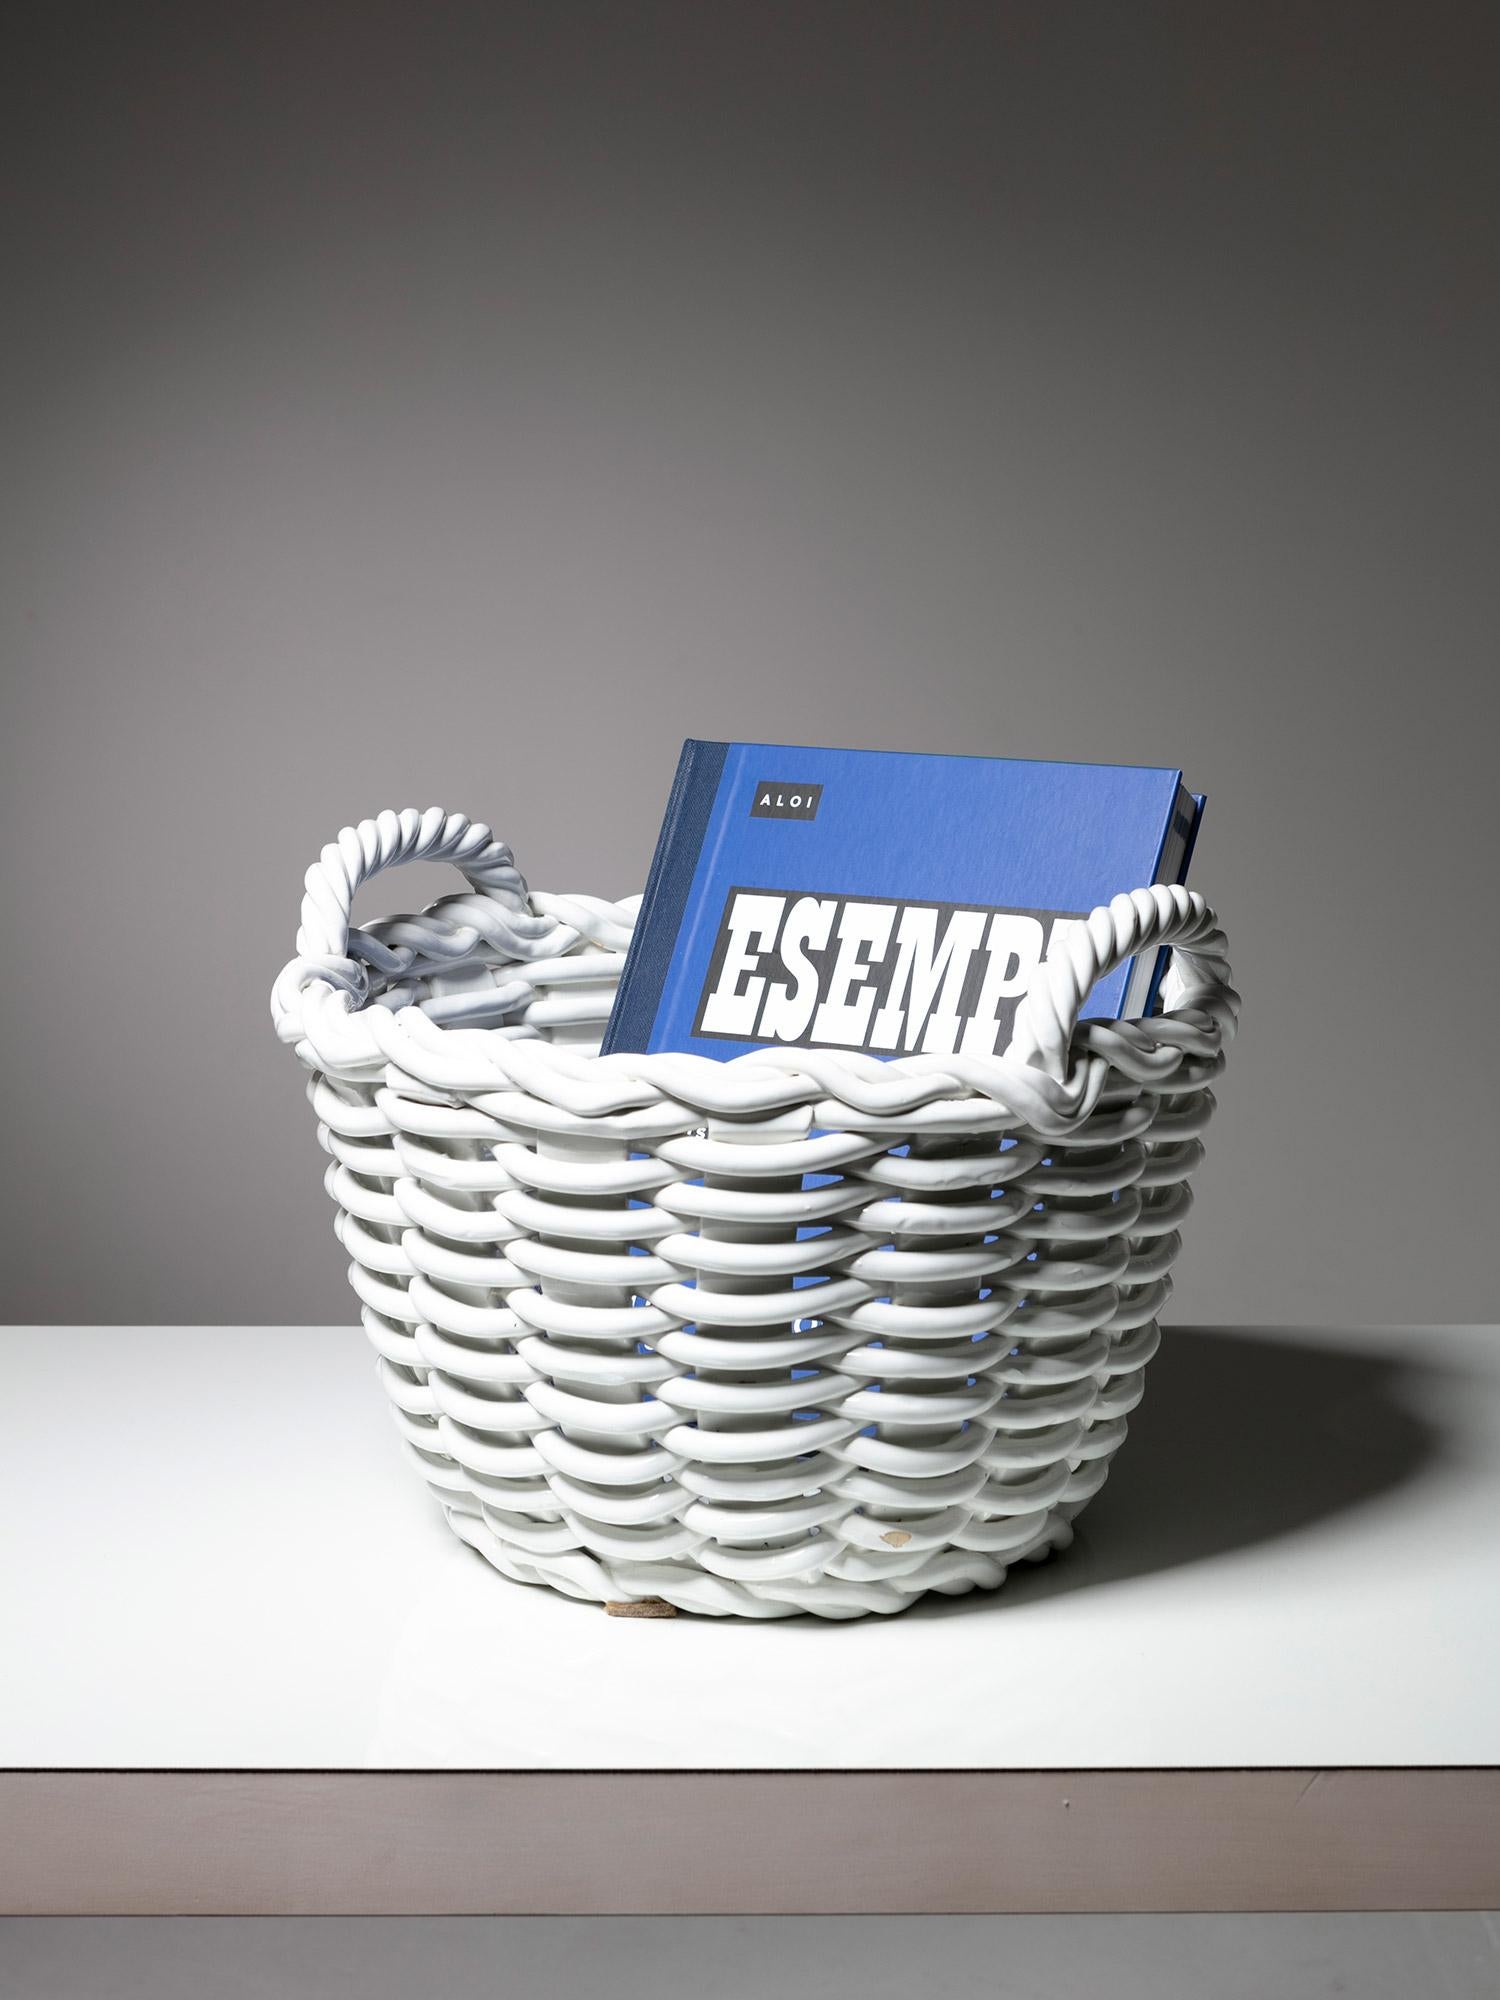 Large Realistic White Ceramic Basket Shaped Centerpiece, Italy, 1970s For Sale 2